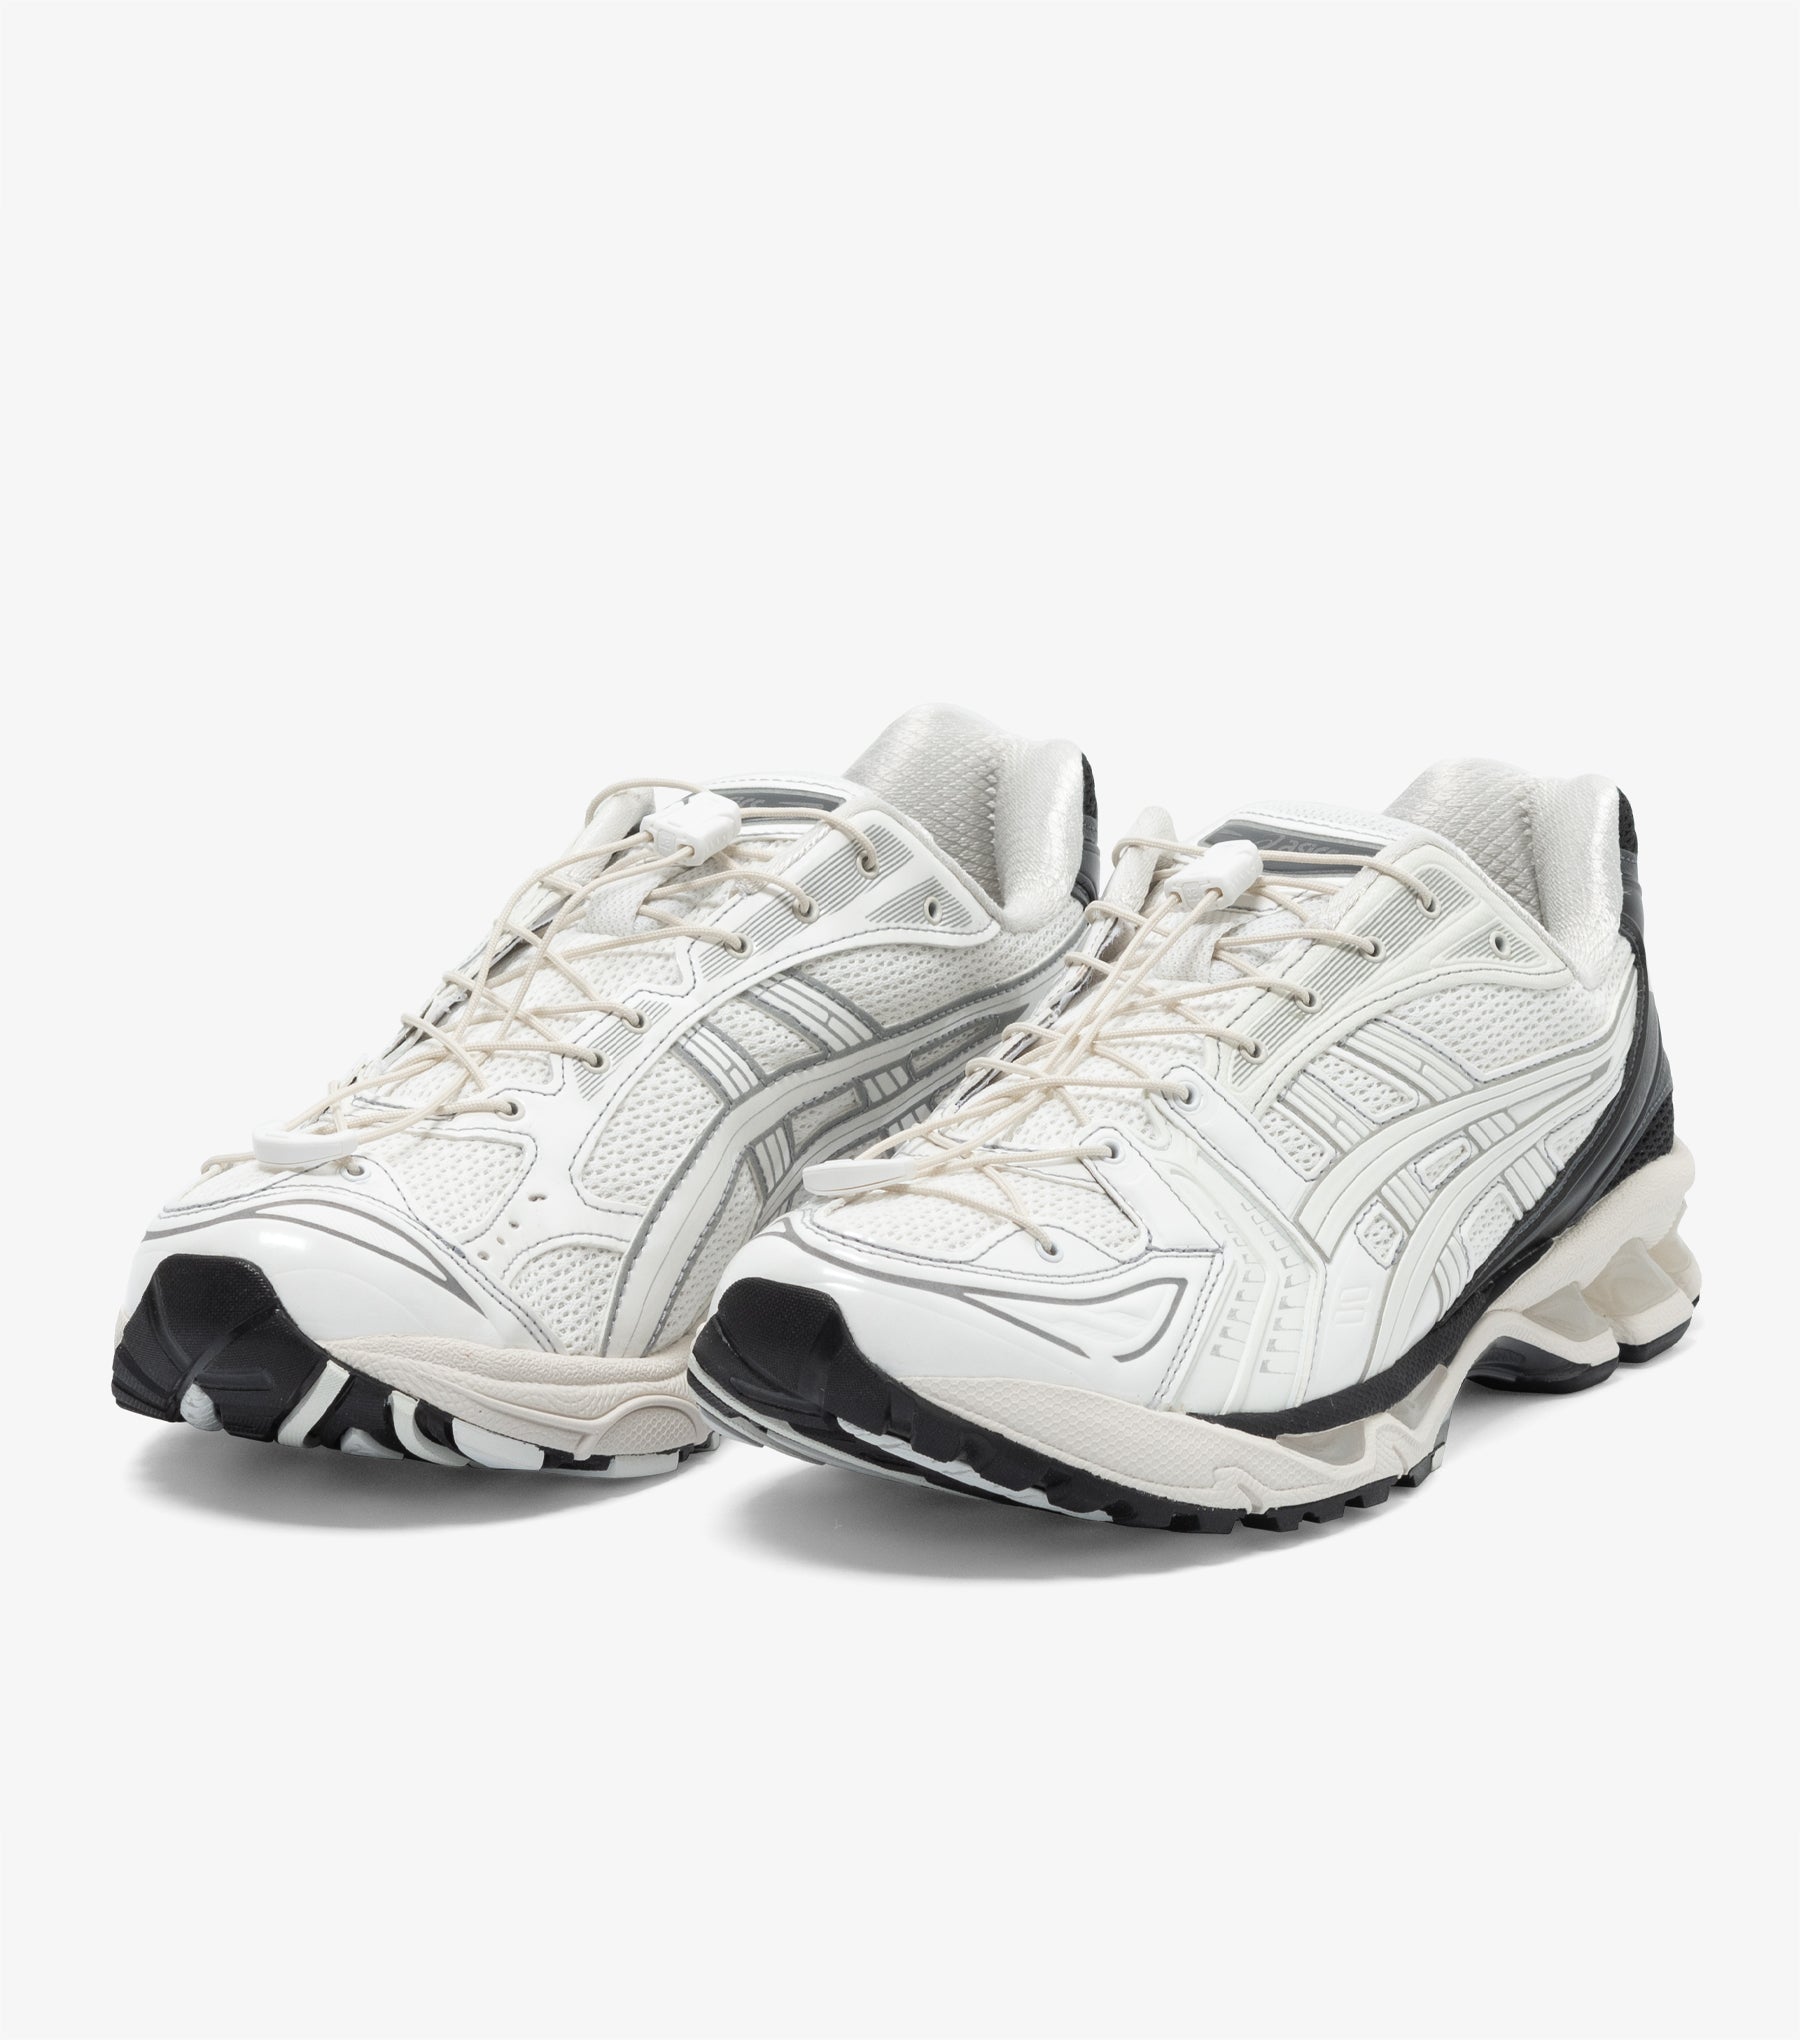 Asics Unaffected Gel-Kayano 14 (White/Black) – Bows and Arrows